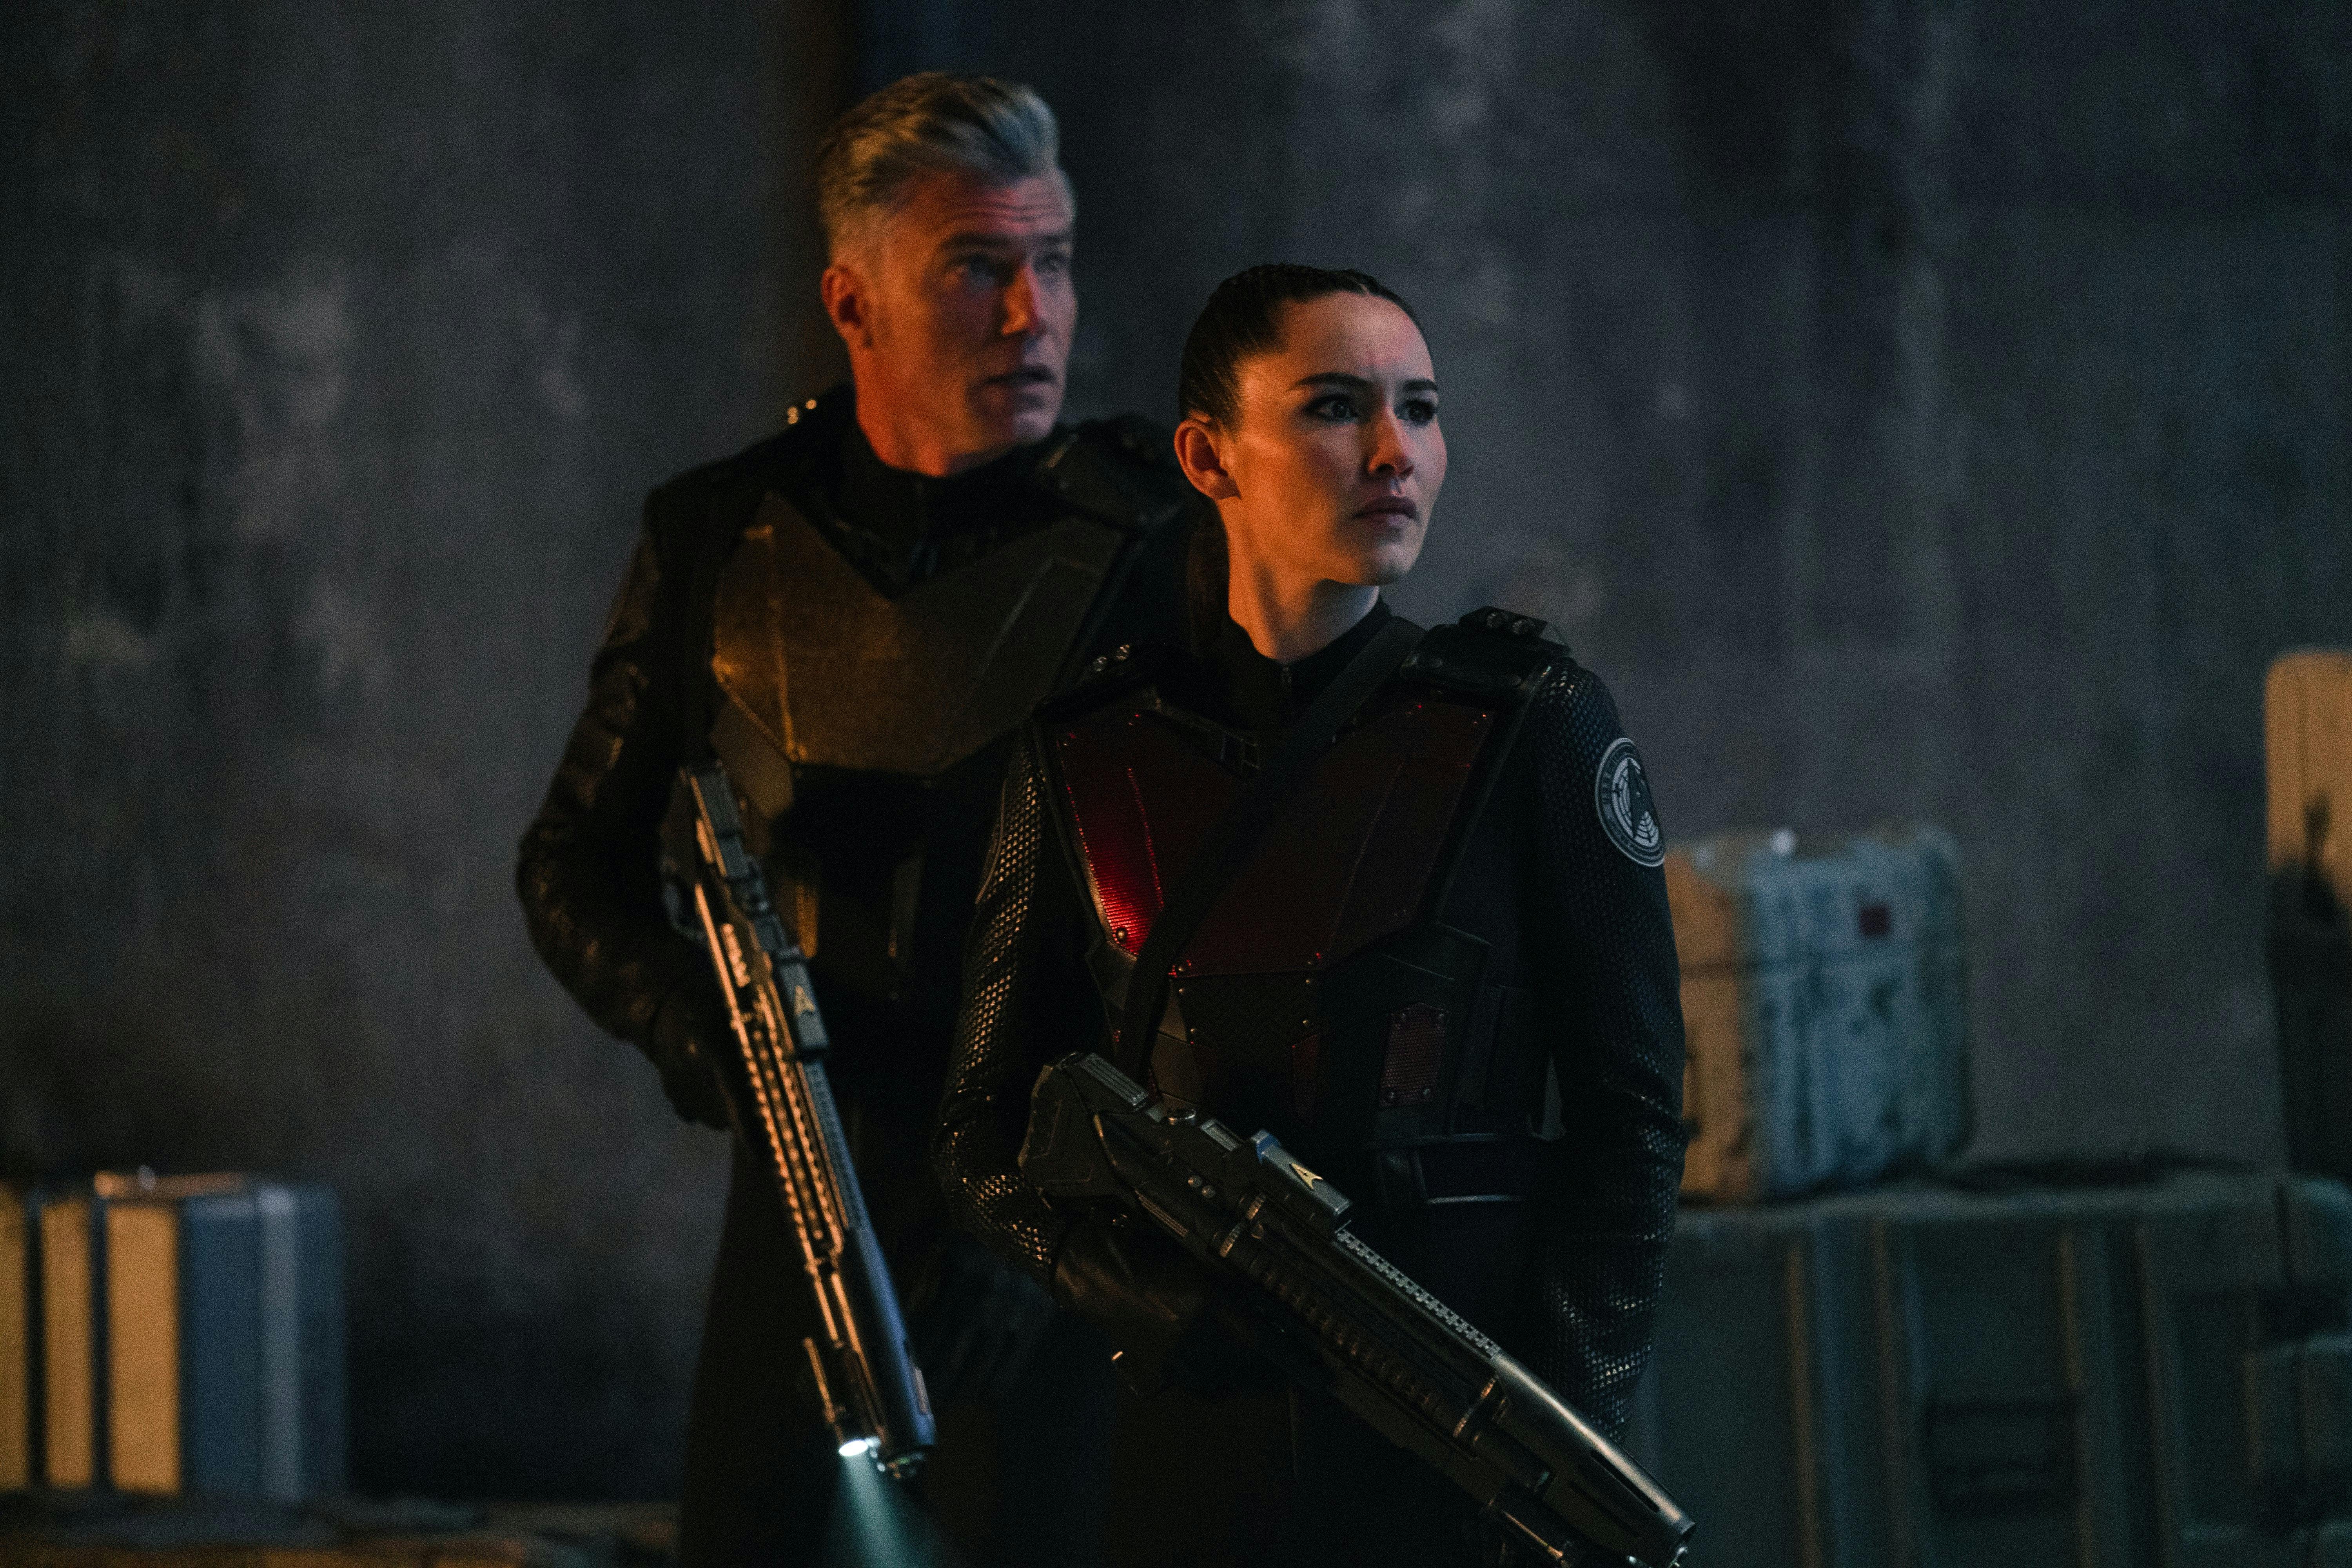 Pike (Anson Mount) and La'An (Christina Chong) stand next to each other. Both are in tactical gear and holding phaser rifles.